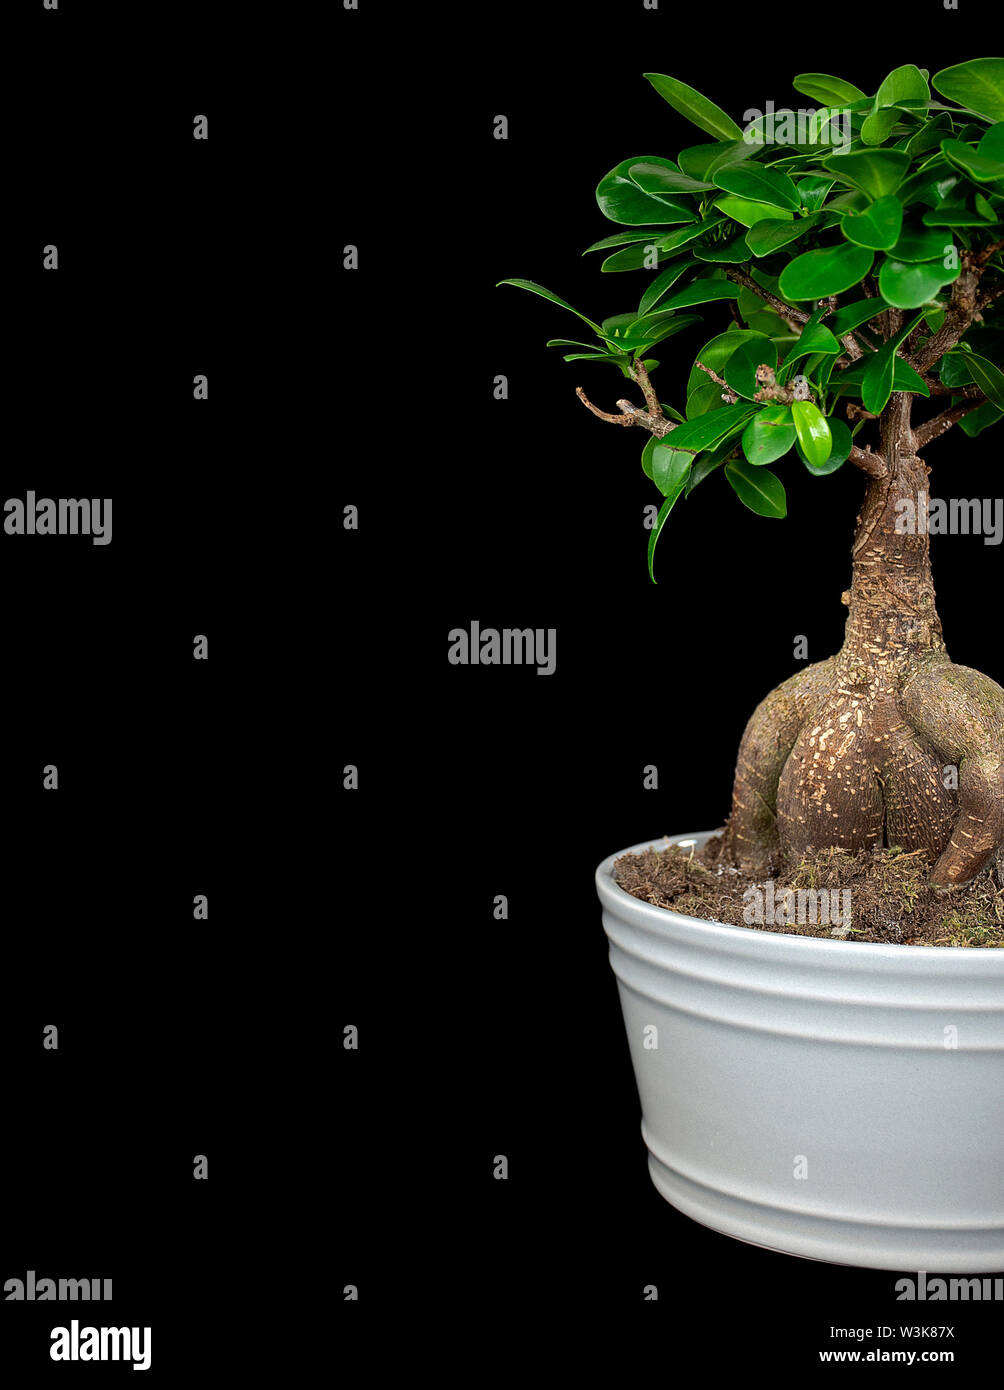 Ginseng Ficus Bonsai tree growing in white pot isolated on black background Stock Photo